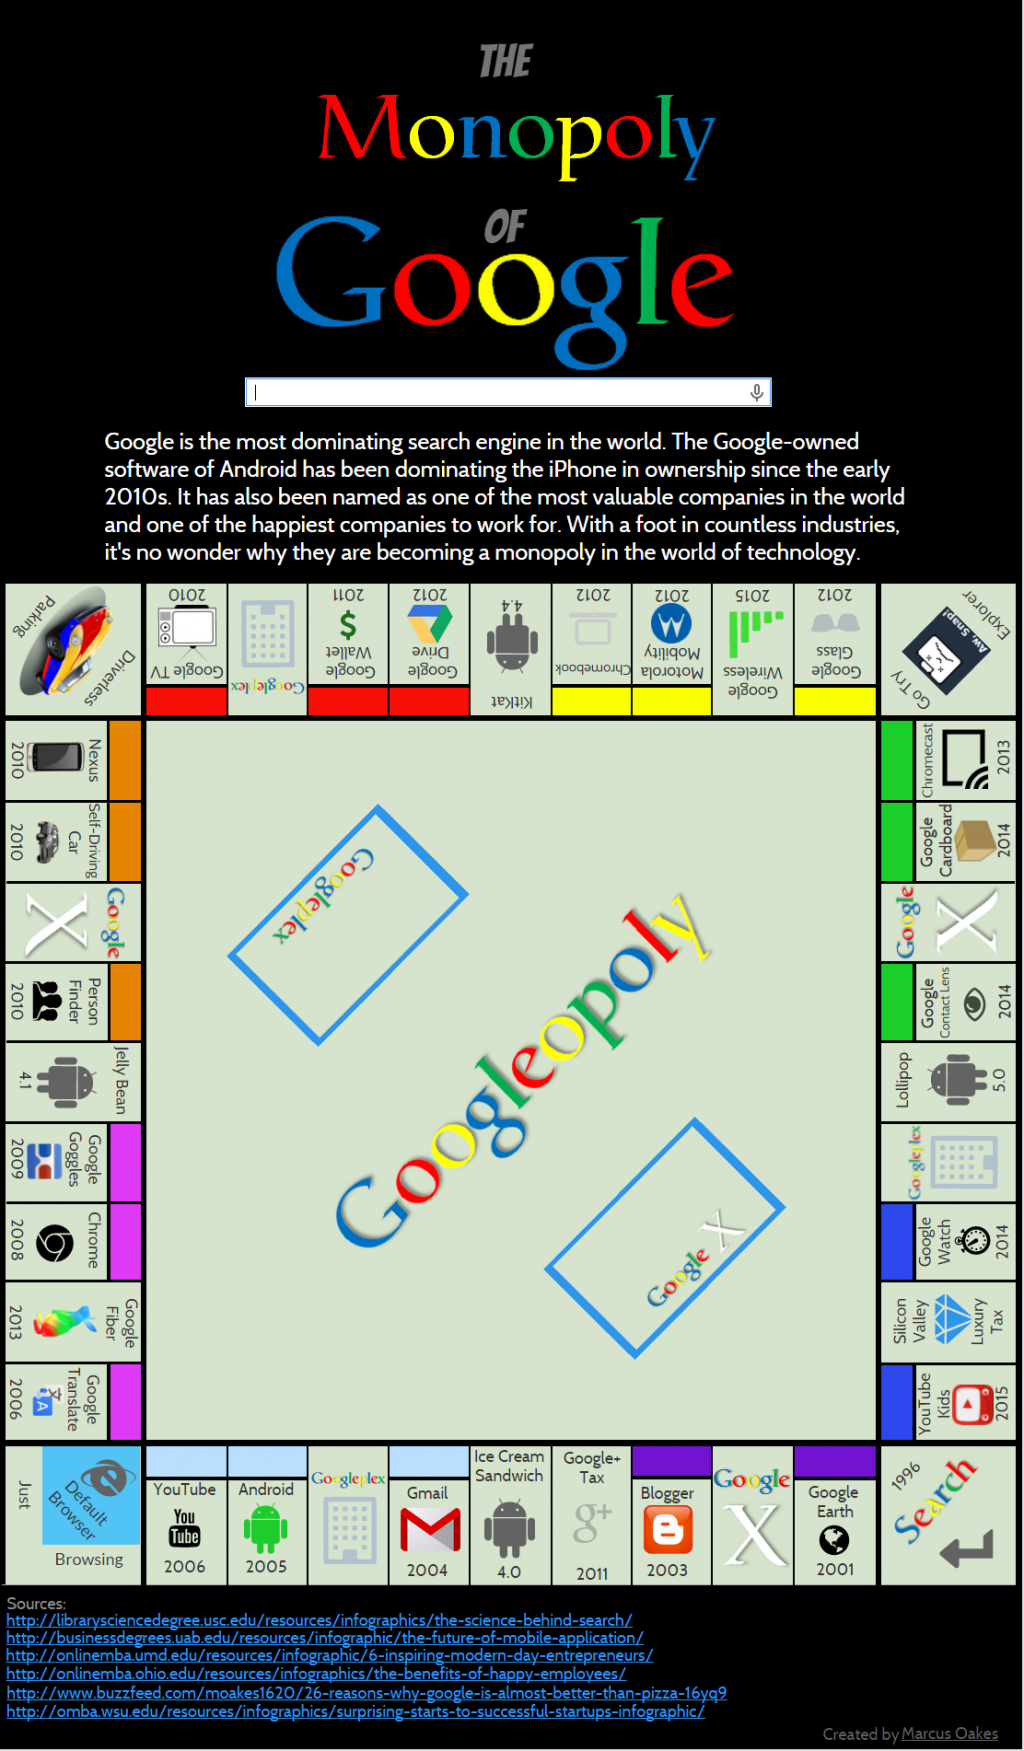 Venngage-The-Monopoly-of-Google.clipular